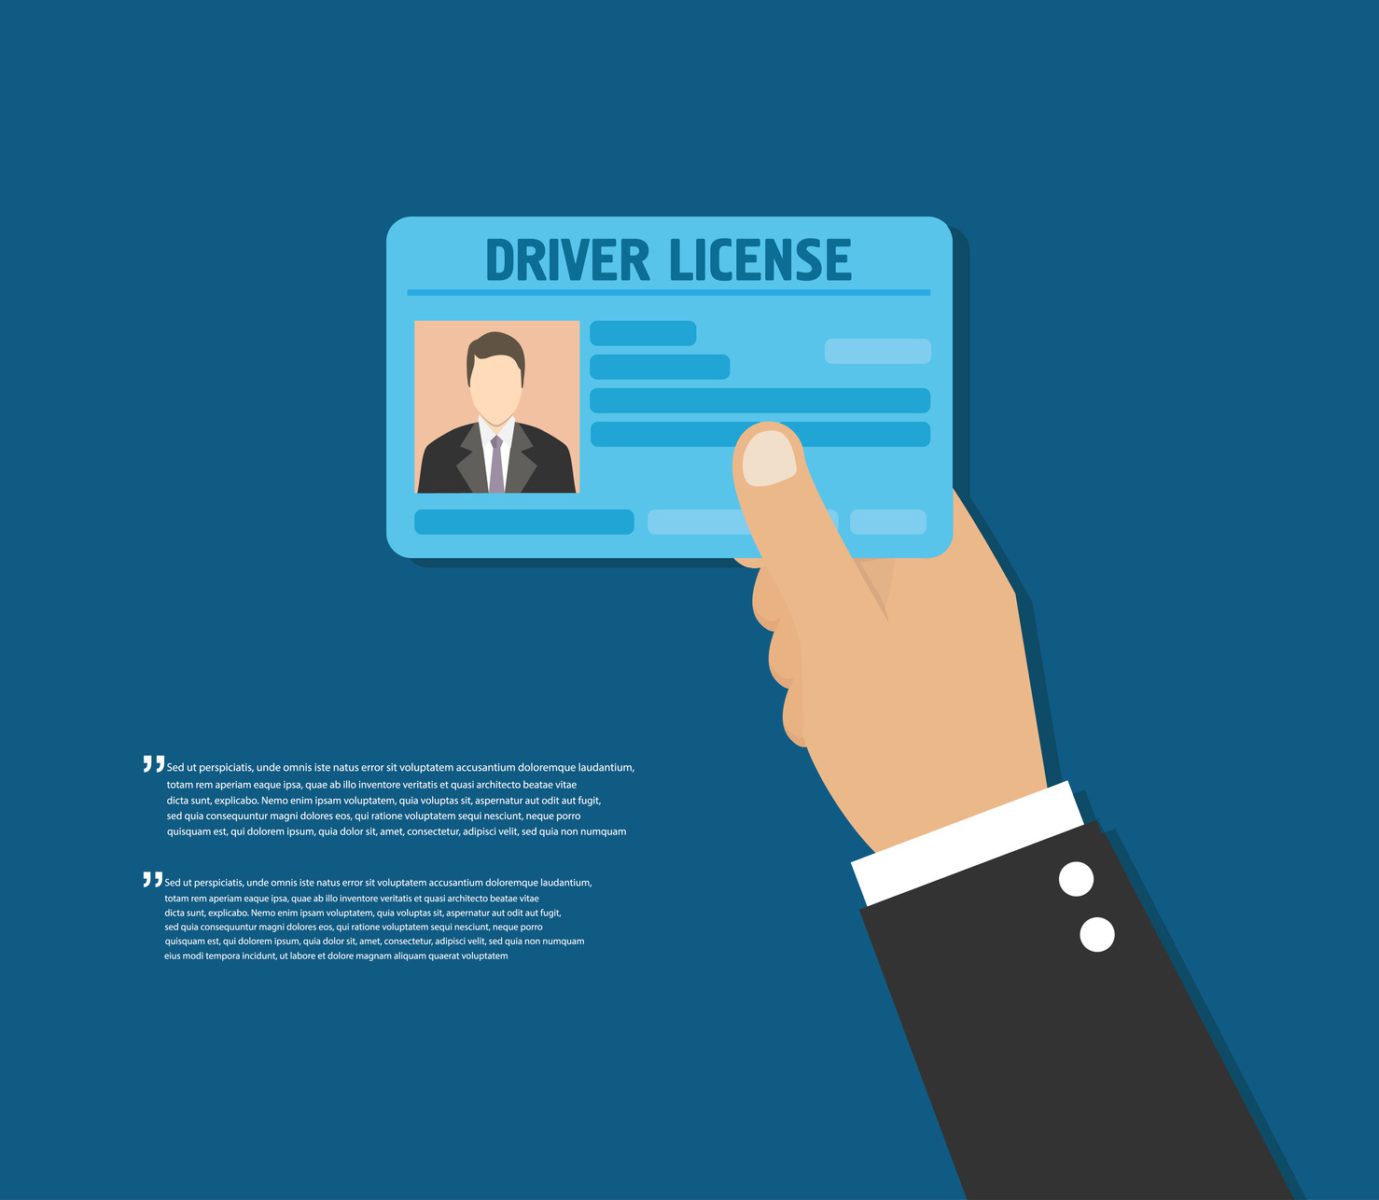 New Driver’s License Law Fraught with Problems, Particularly for Eagle County Residents